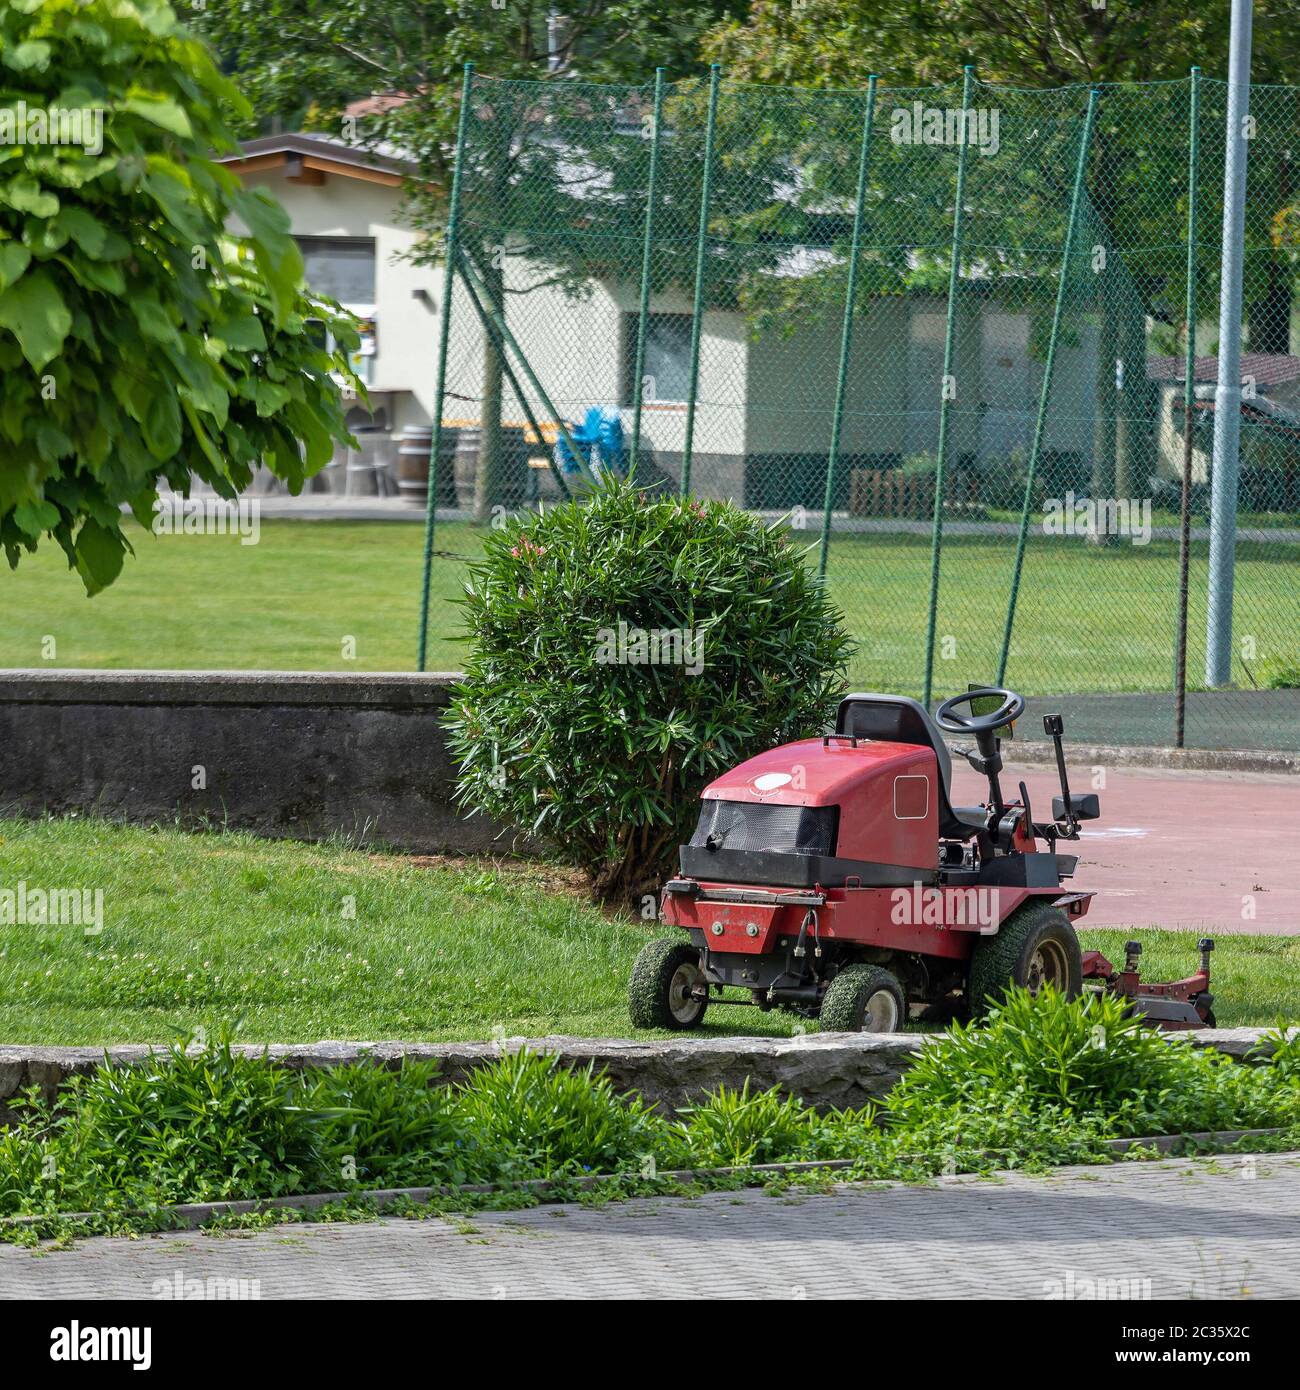 Ride on Lawn Mower Machine in Park Stock Photo